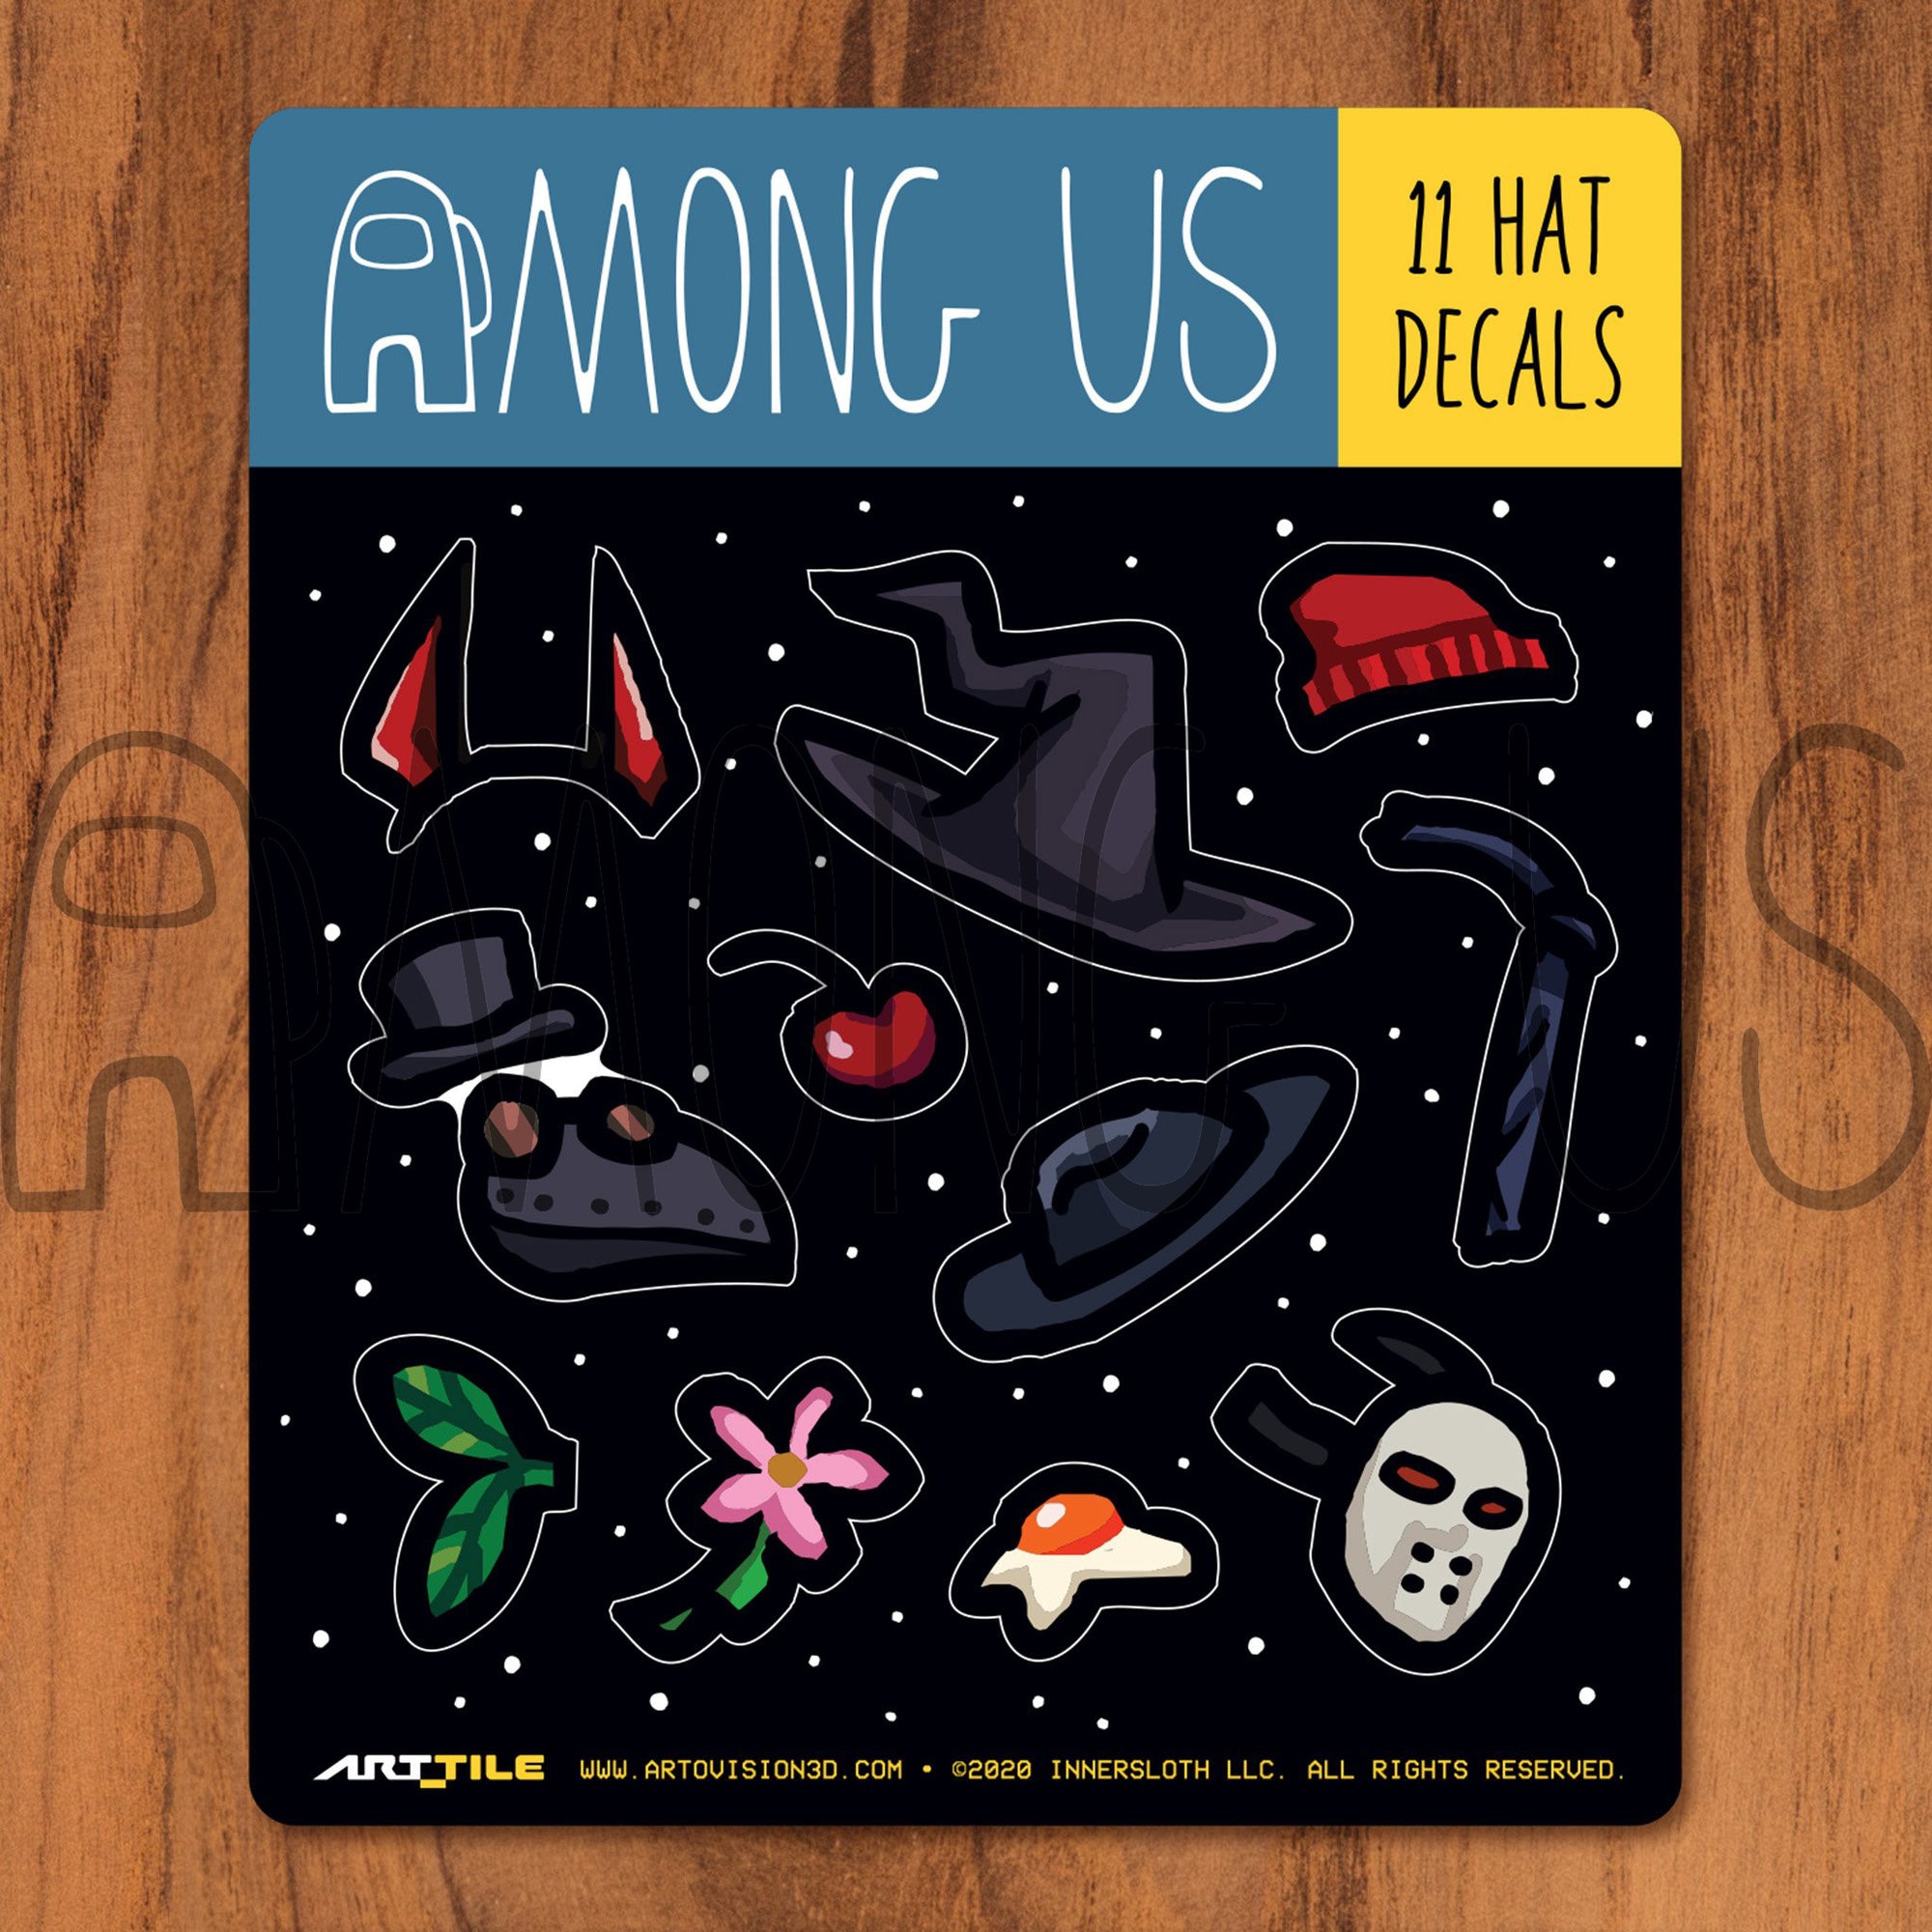 A product photograph of the pet decals that are part of the Among Us: Crewmate Art Tile Decals by Artovision3D. There are 9 pet decal options available: robot, H. Stickmin, bedcrab, UFO, doggy, squig, headslug, hampton, and E. Rose. 